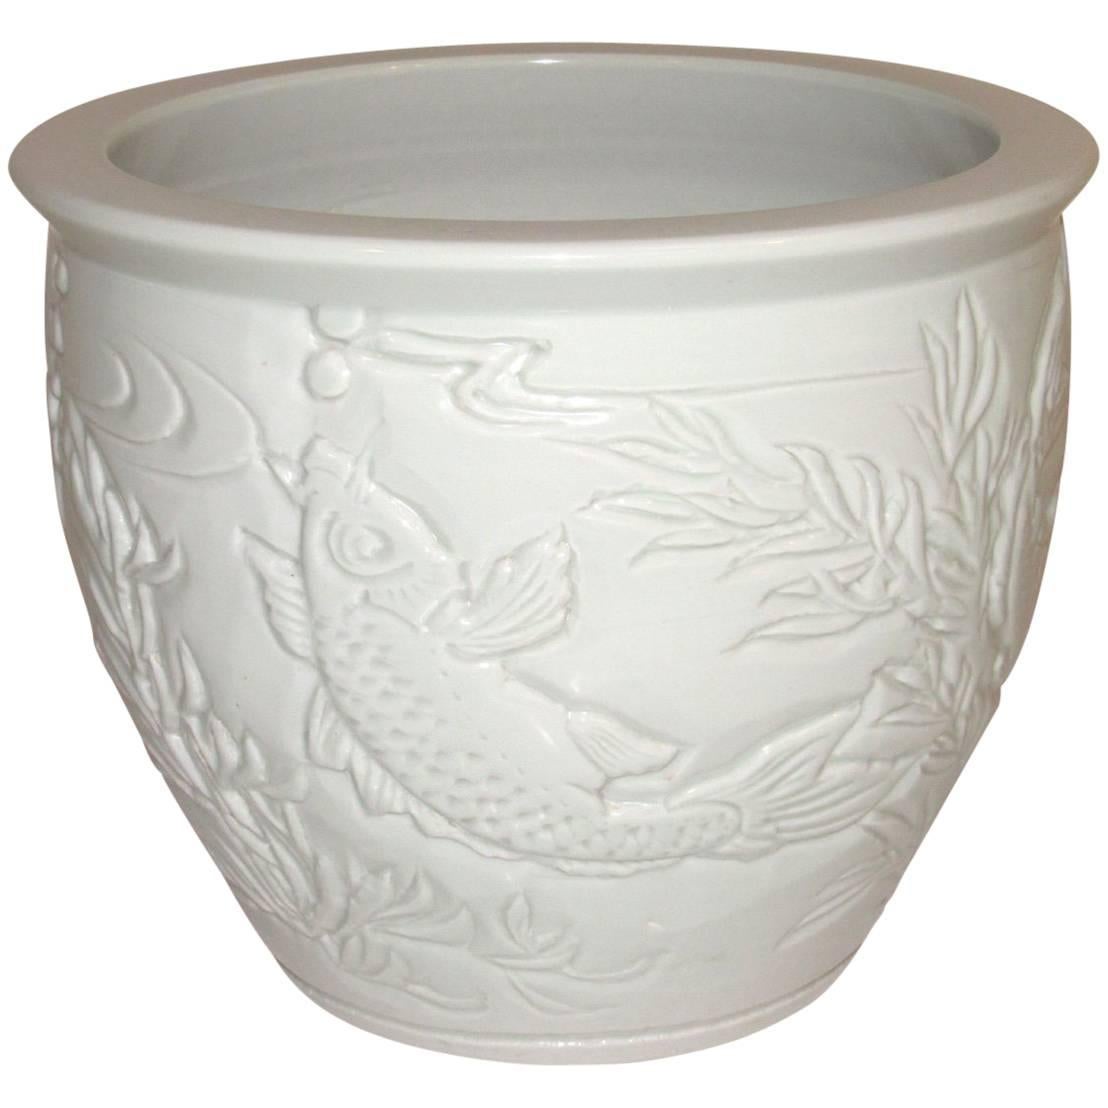 Early 20th Century Chinese Celadon Planter For Sale